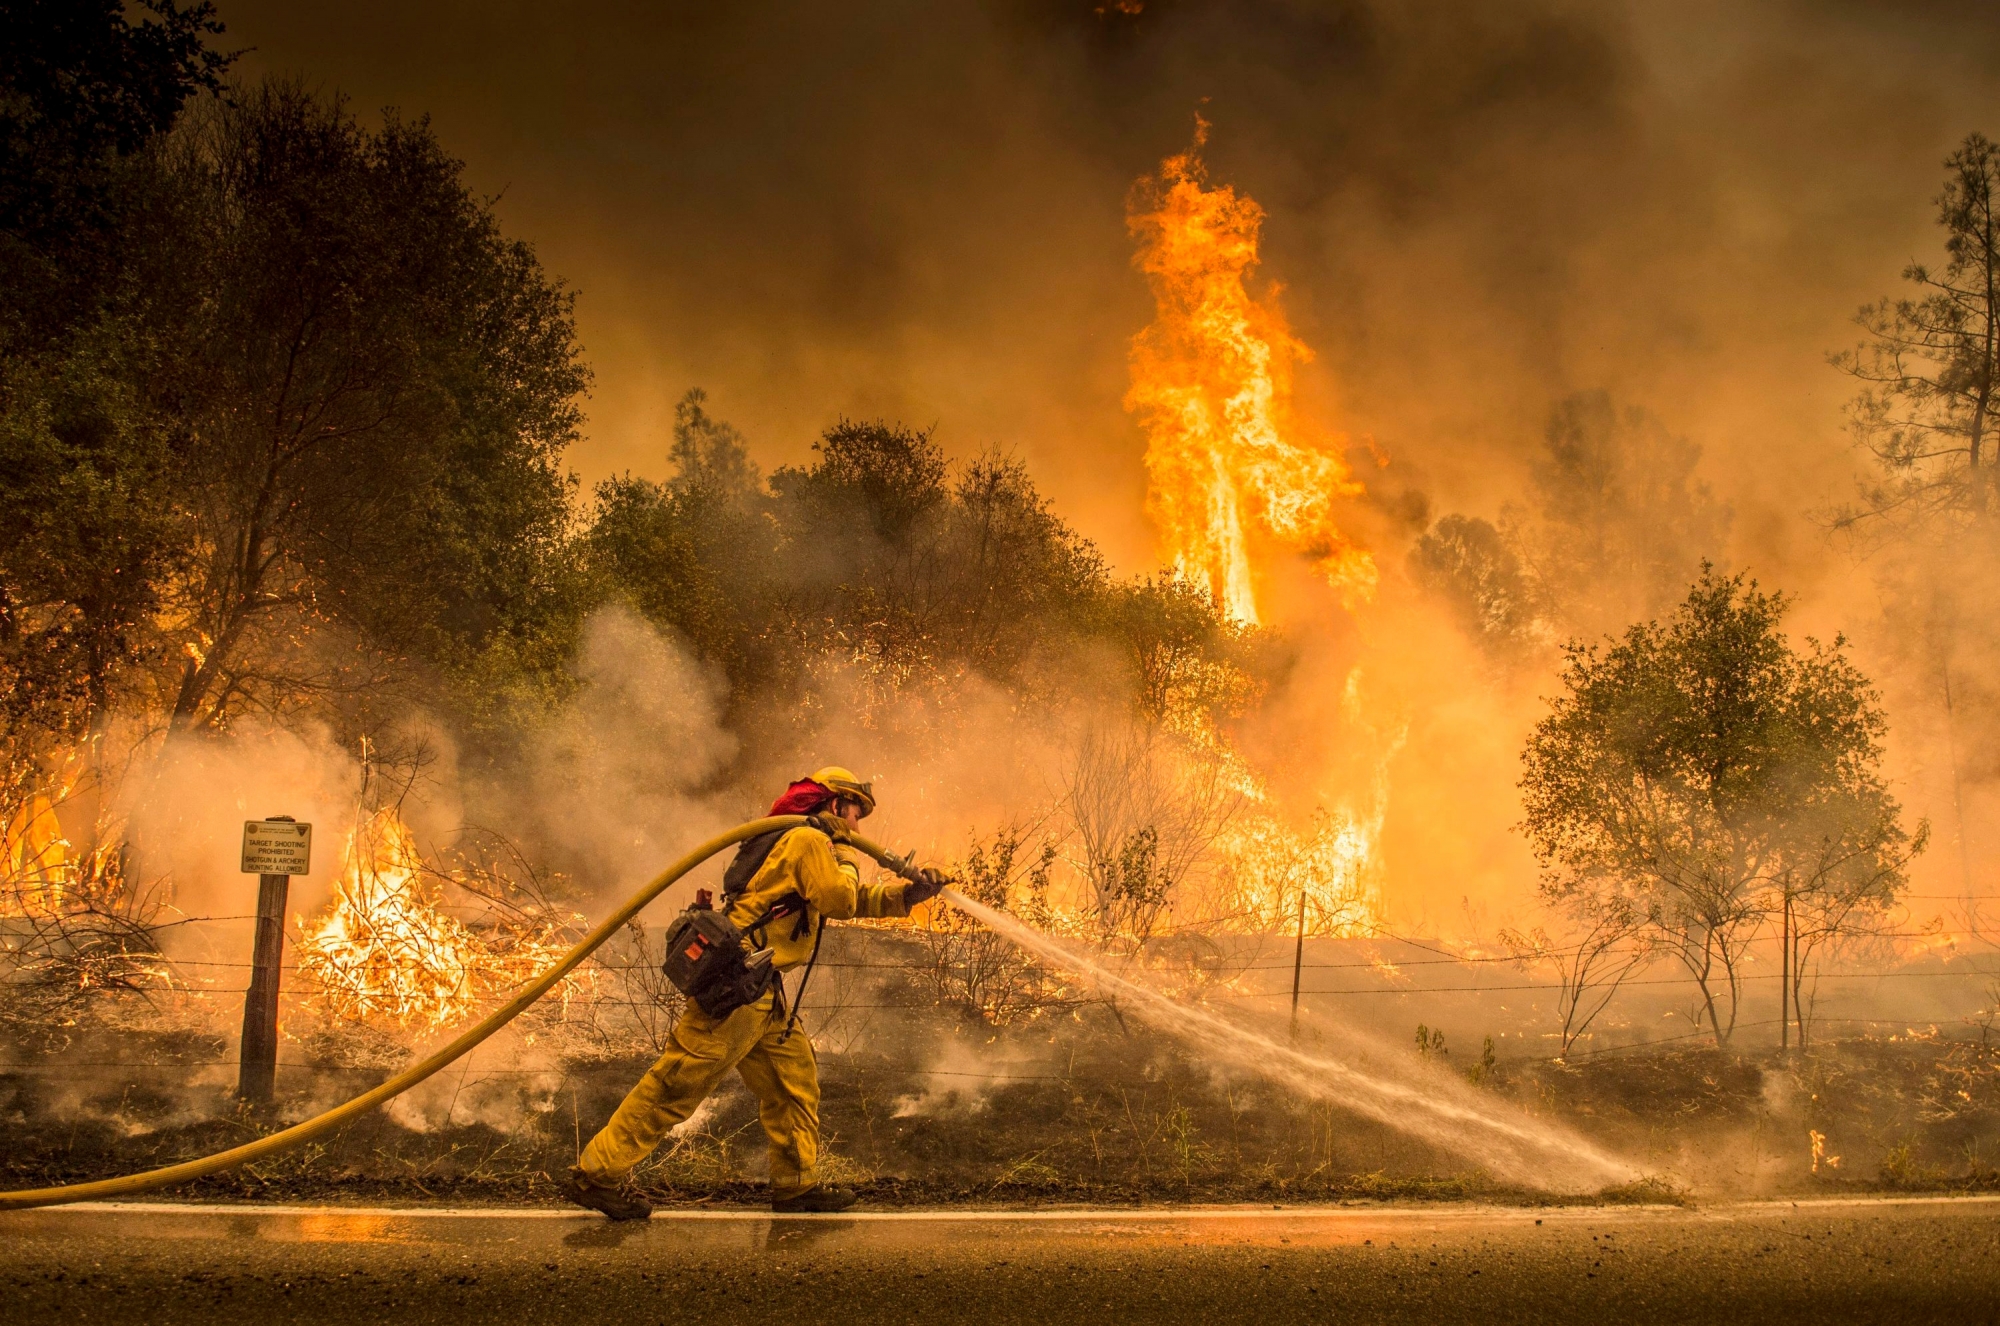 A Cal Fire firefighter waters down a back burn on Cloverdale Rd., near the town of Igo, Calif., Saturday, July 28, 2018. The back burn kept the fire from jumping towards Igo, Calif. Scorching heat, winds and dry conditions complicated firefighting efforts. (Hector Amezcua/The Sacramento Bee via AP) APTOPIX California Wildfires